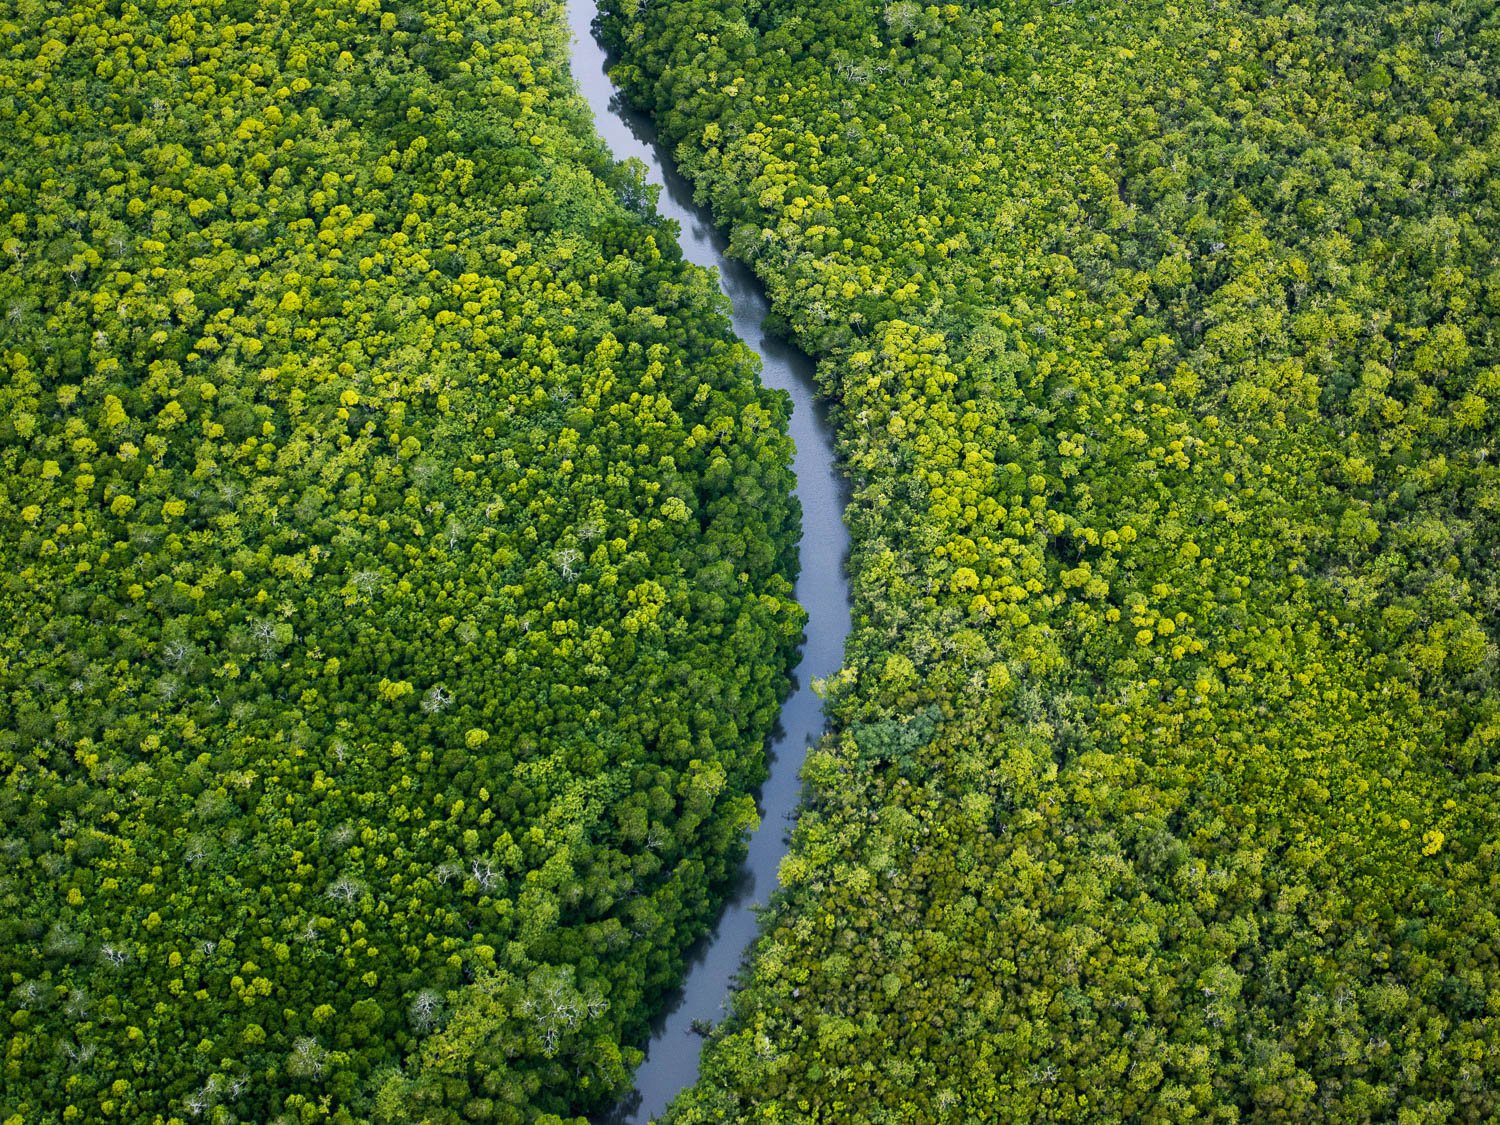 A long curvy line between a thick greenery land, River Ribbon cuts through the mangroves, Daintree River, Far North Queensland